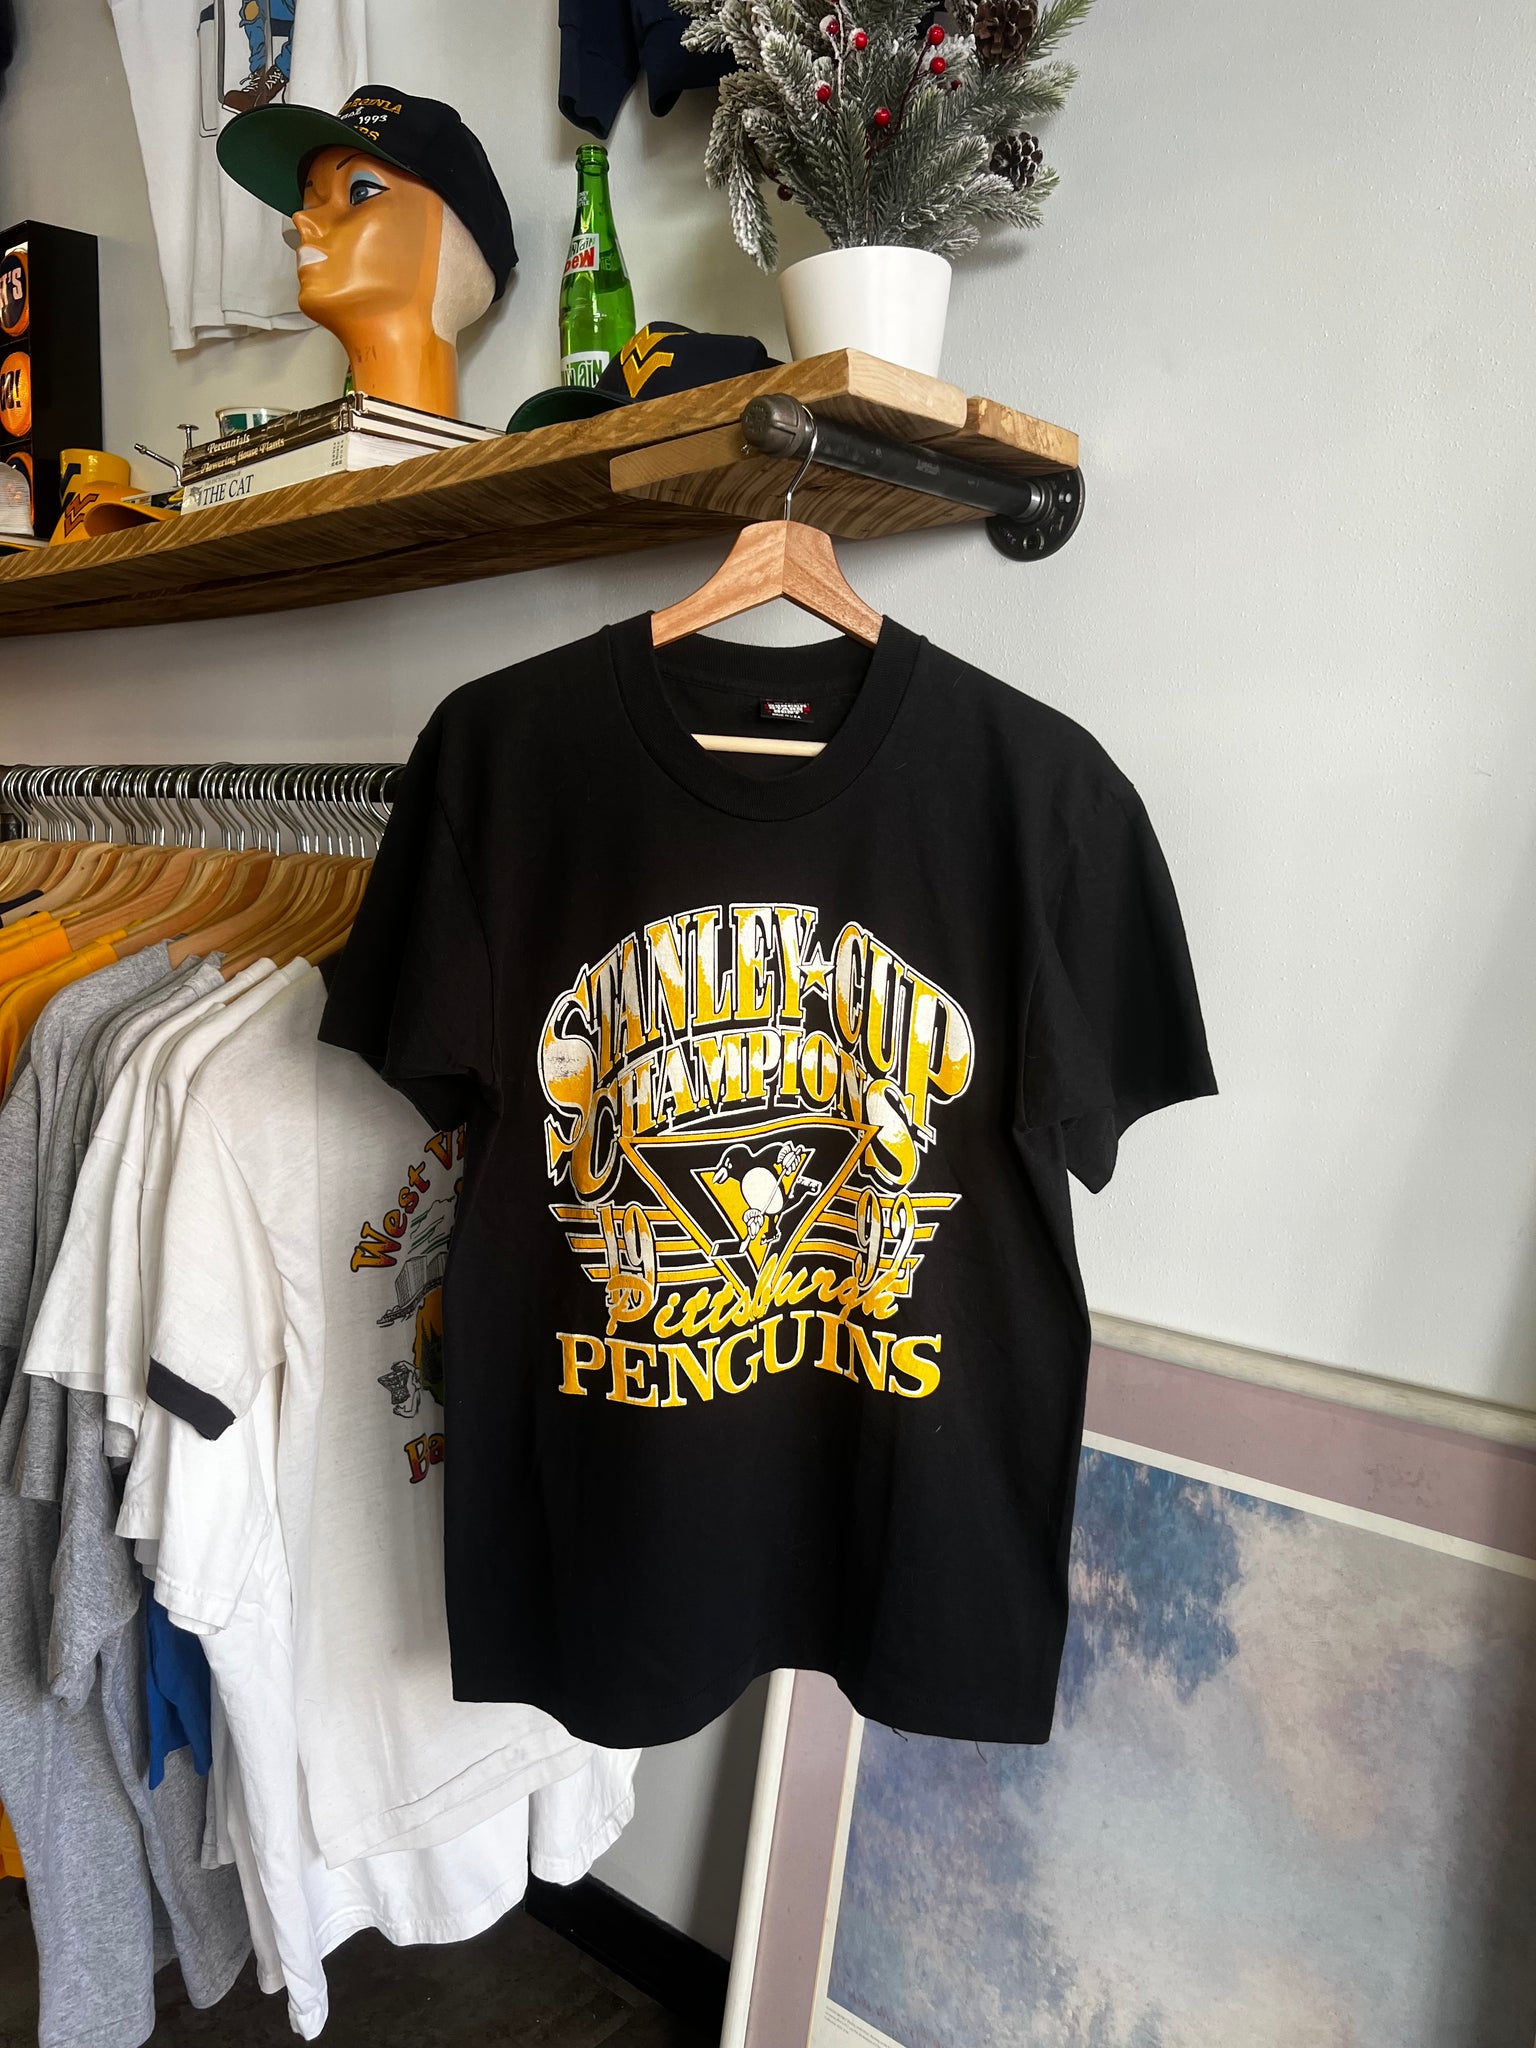 Vintage 90s Pittsburgh Penguins Stanley Cup Champs Graphic Tee